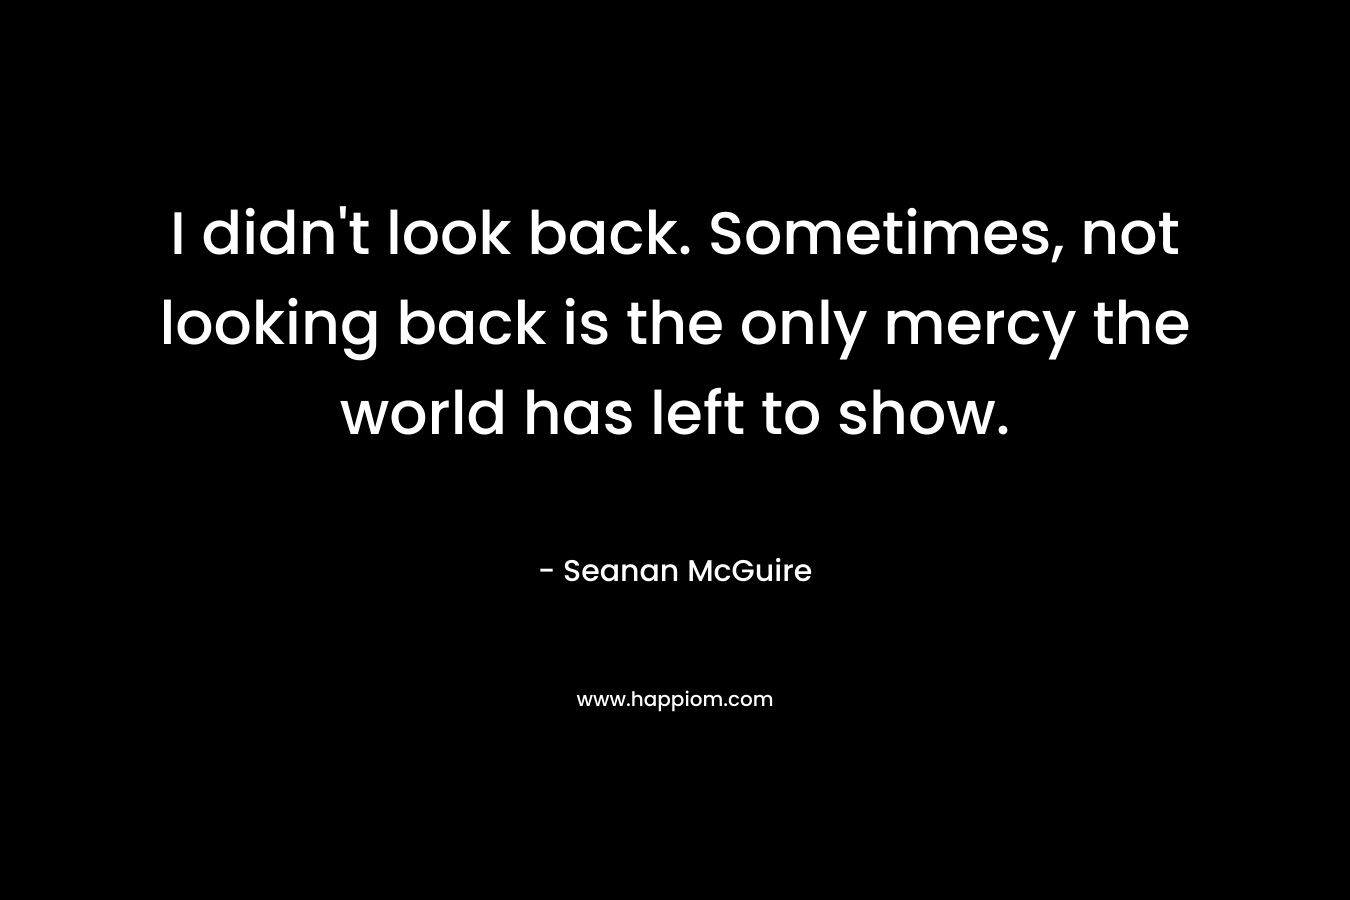 I didn't look back. Sometimes, not looking back is the only mercy the world has left to show.